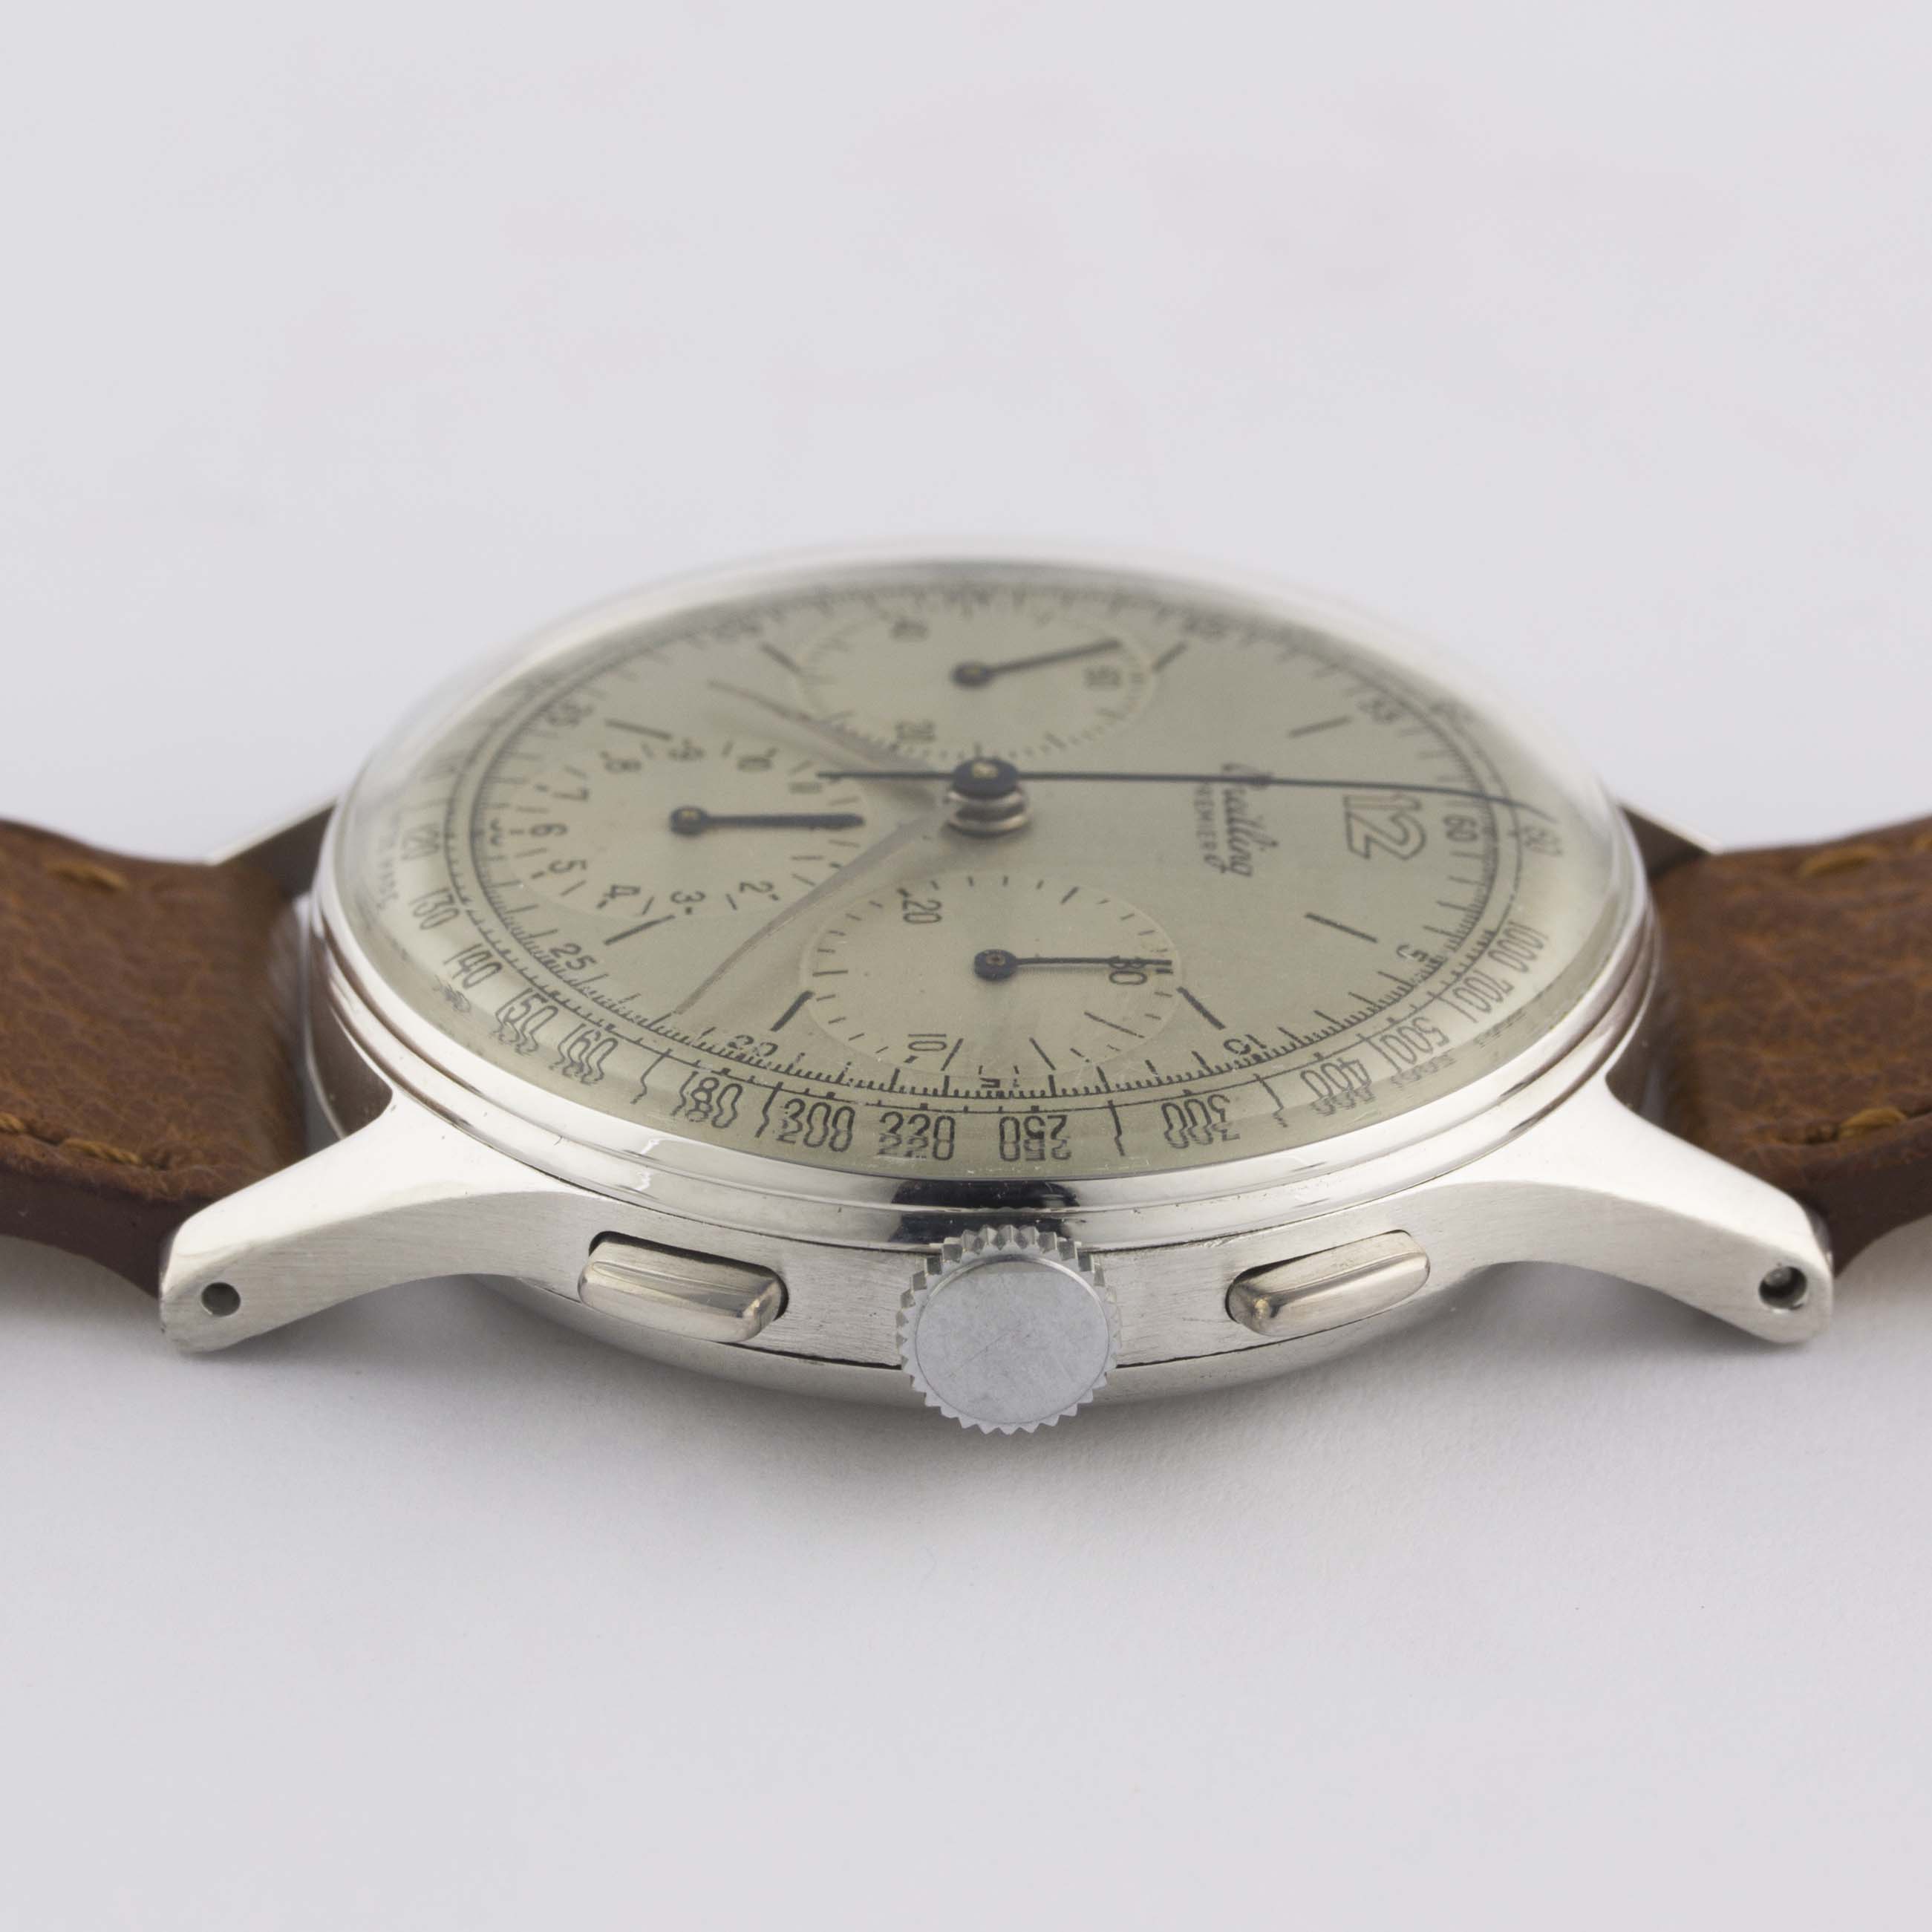 A RARE GENTLEMAN'S LARGE SIZE BREITLING PREMIER CHRONOGRAPH WRIST WATCH CIRCA 1946, REF. 734 - Image 8 of 9